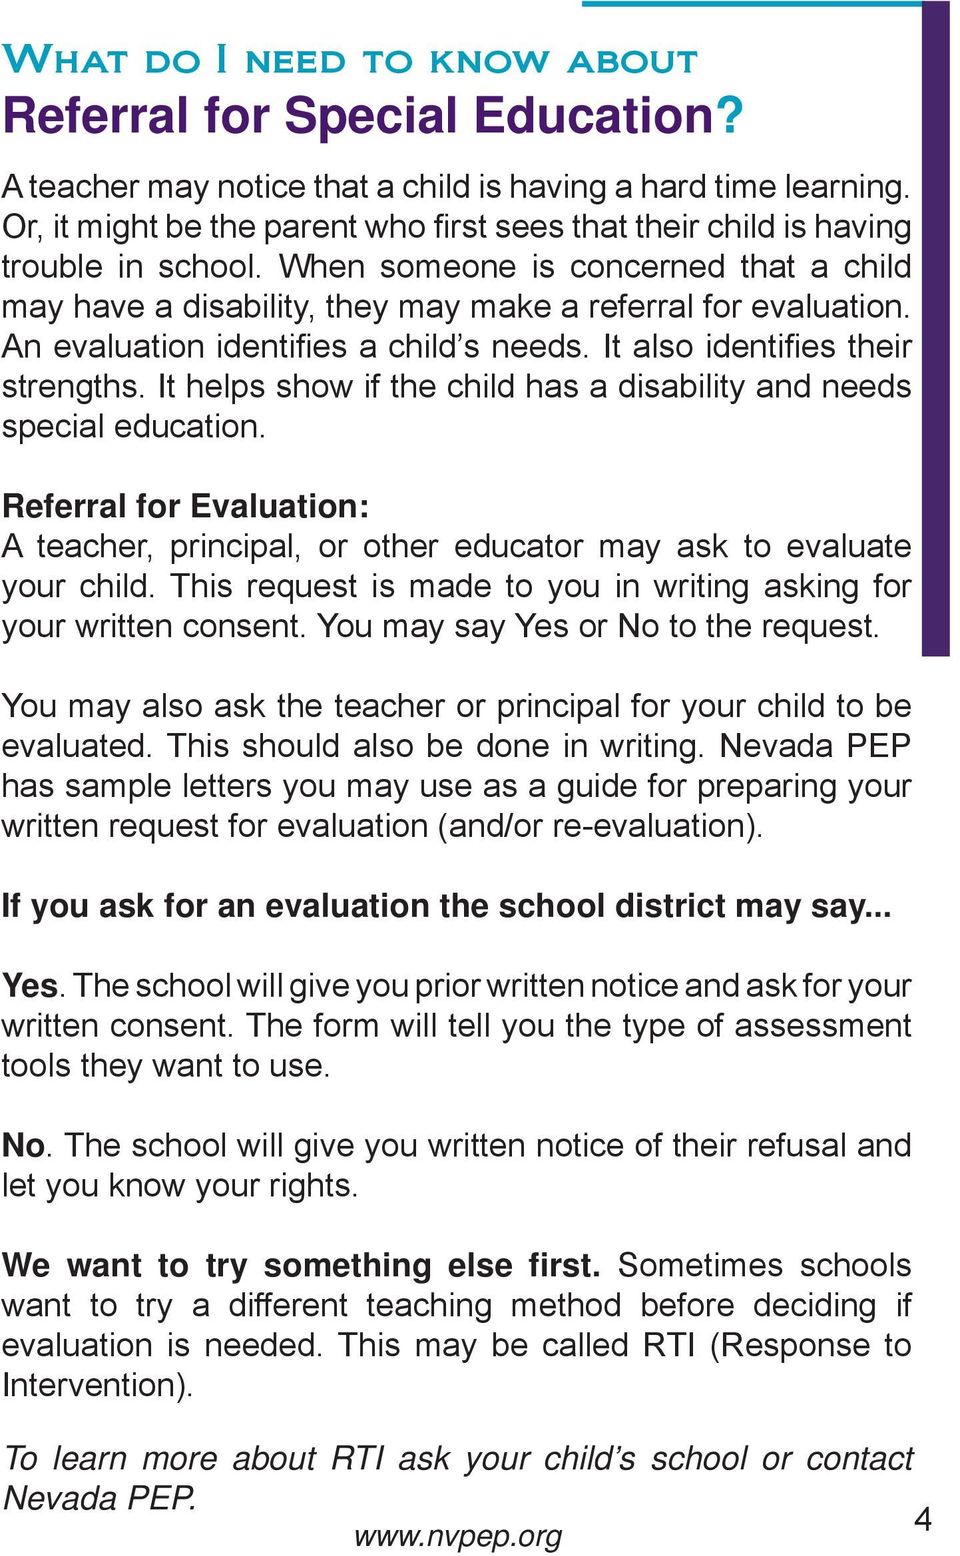 An evaluation identifi es a child s needs. It also identifi es their strengths. It helps show if the child has a disability and needs special education.